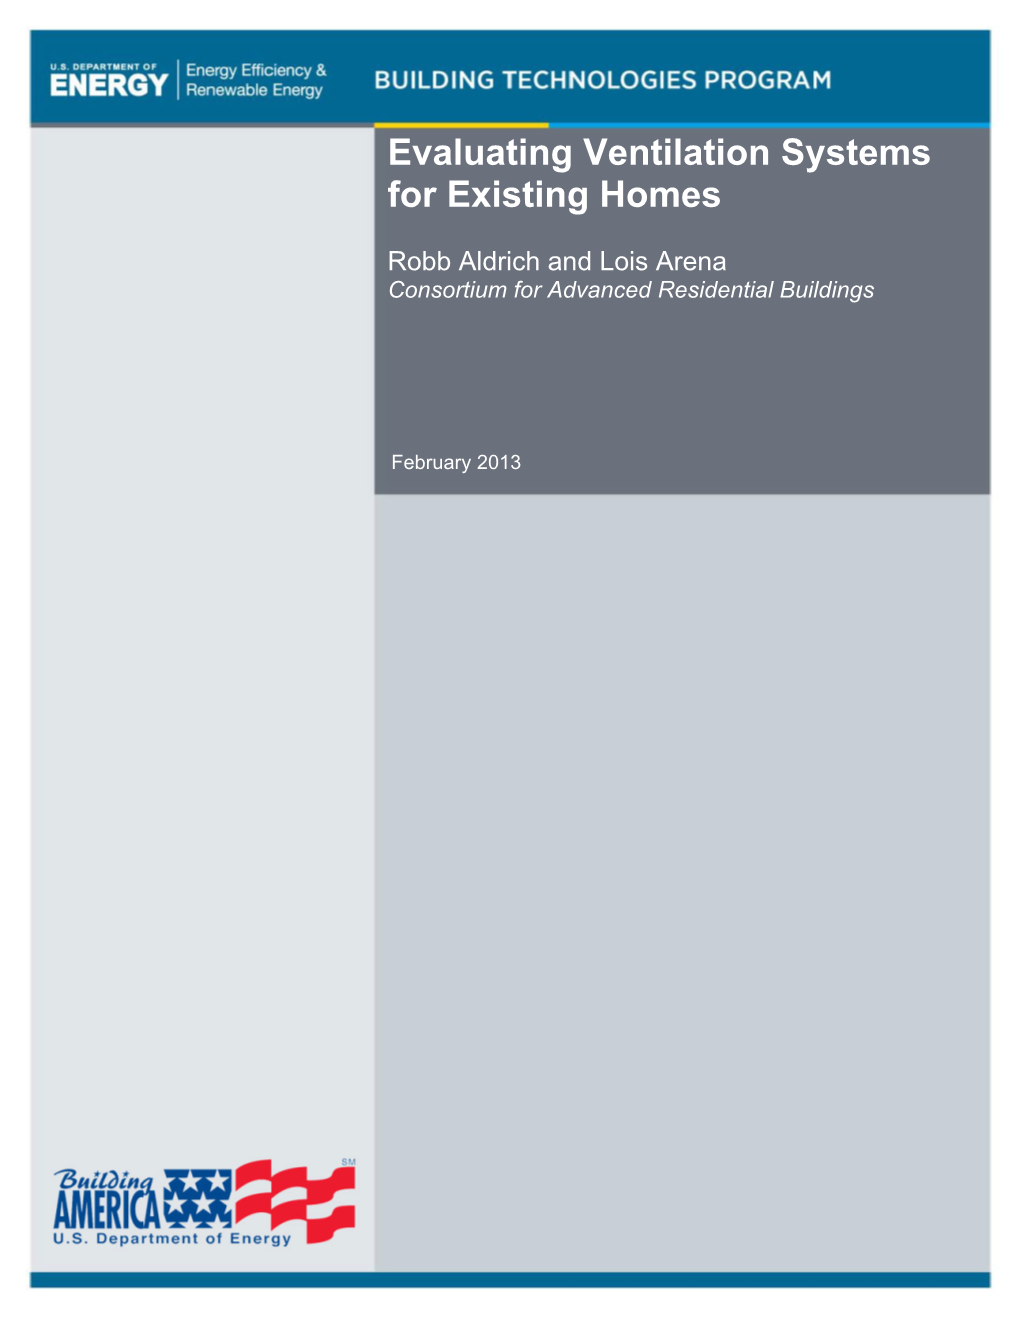 Evaluating Ventilation Systems for Existing Homes